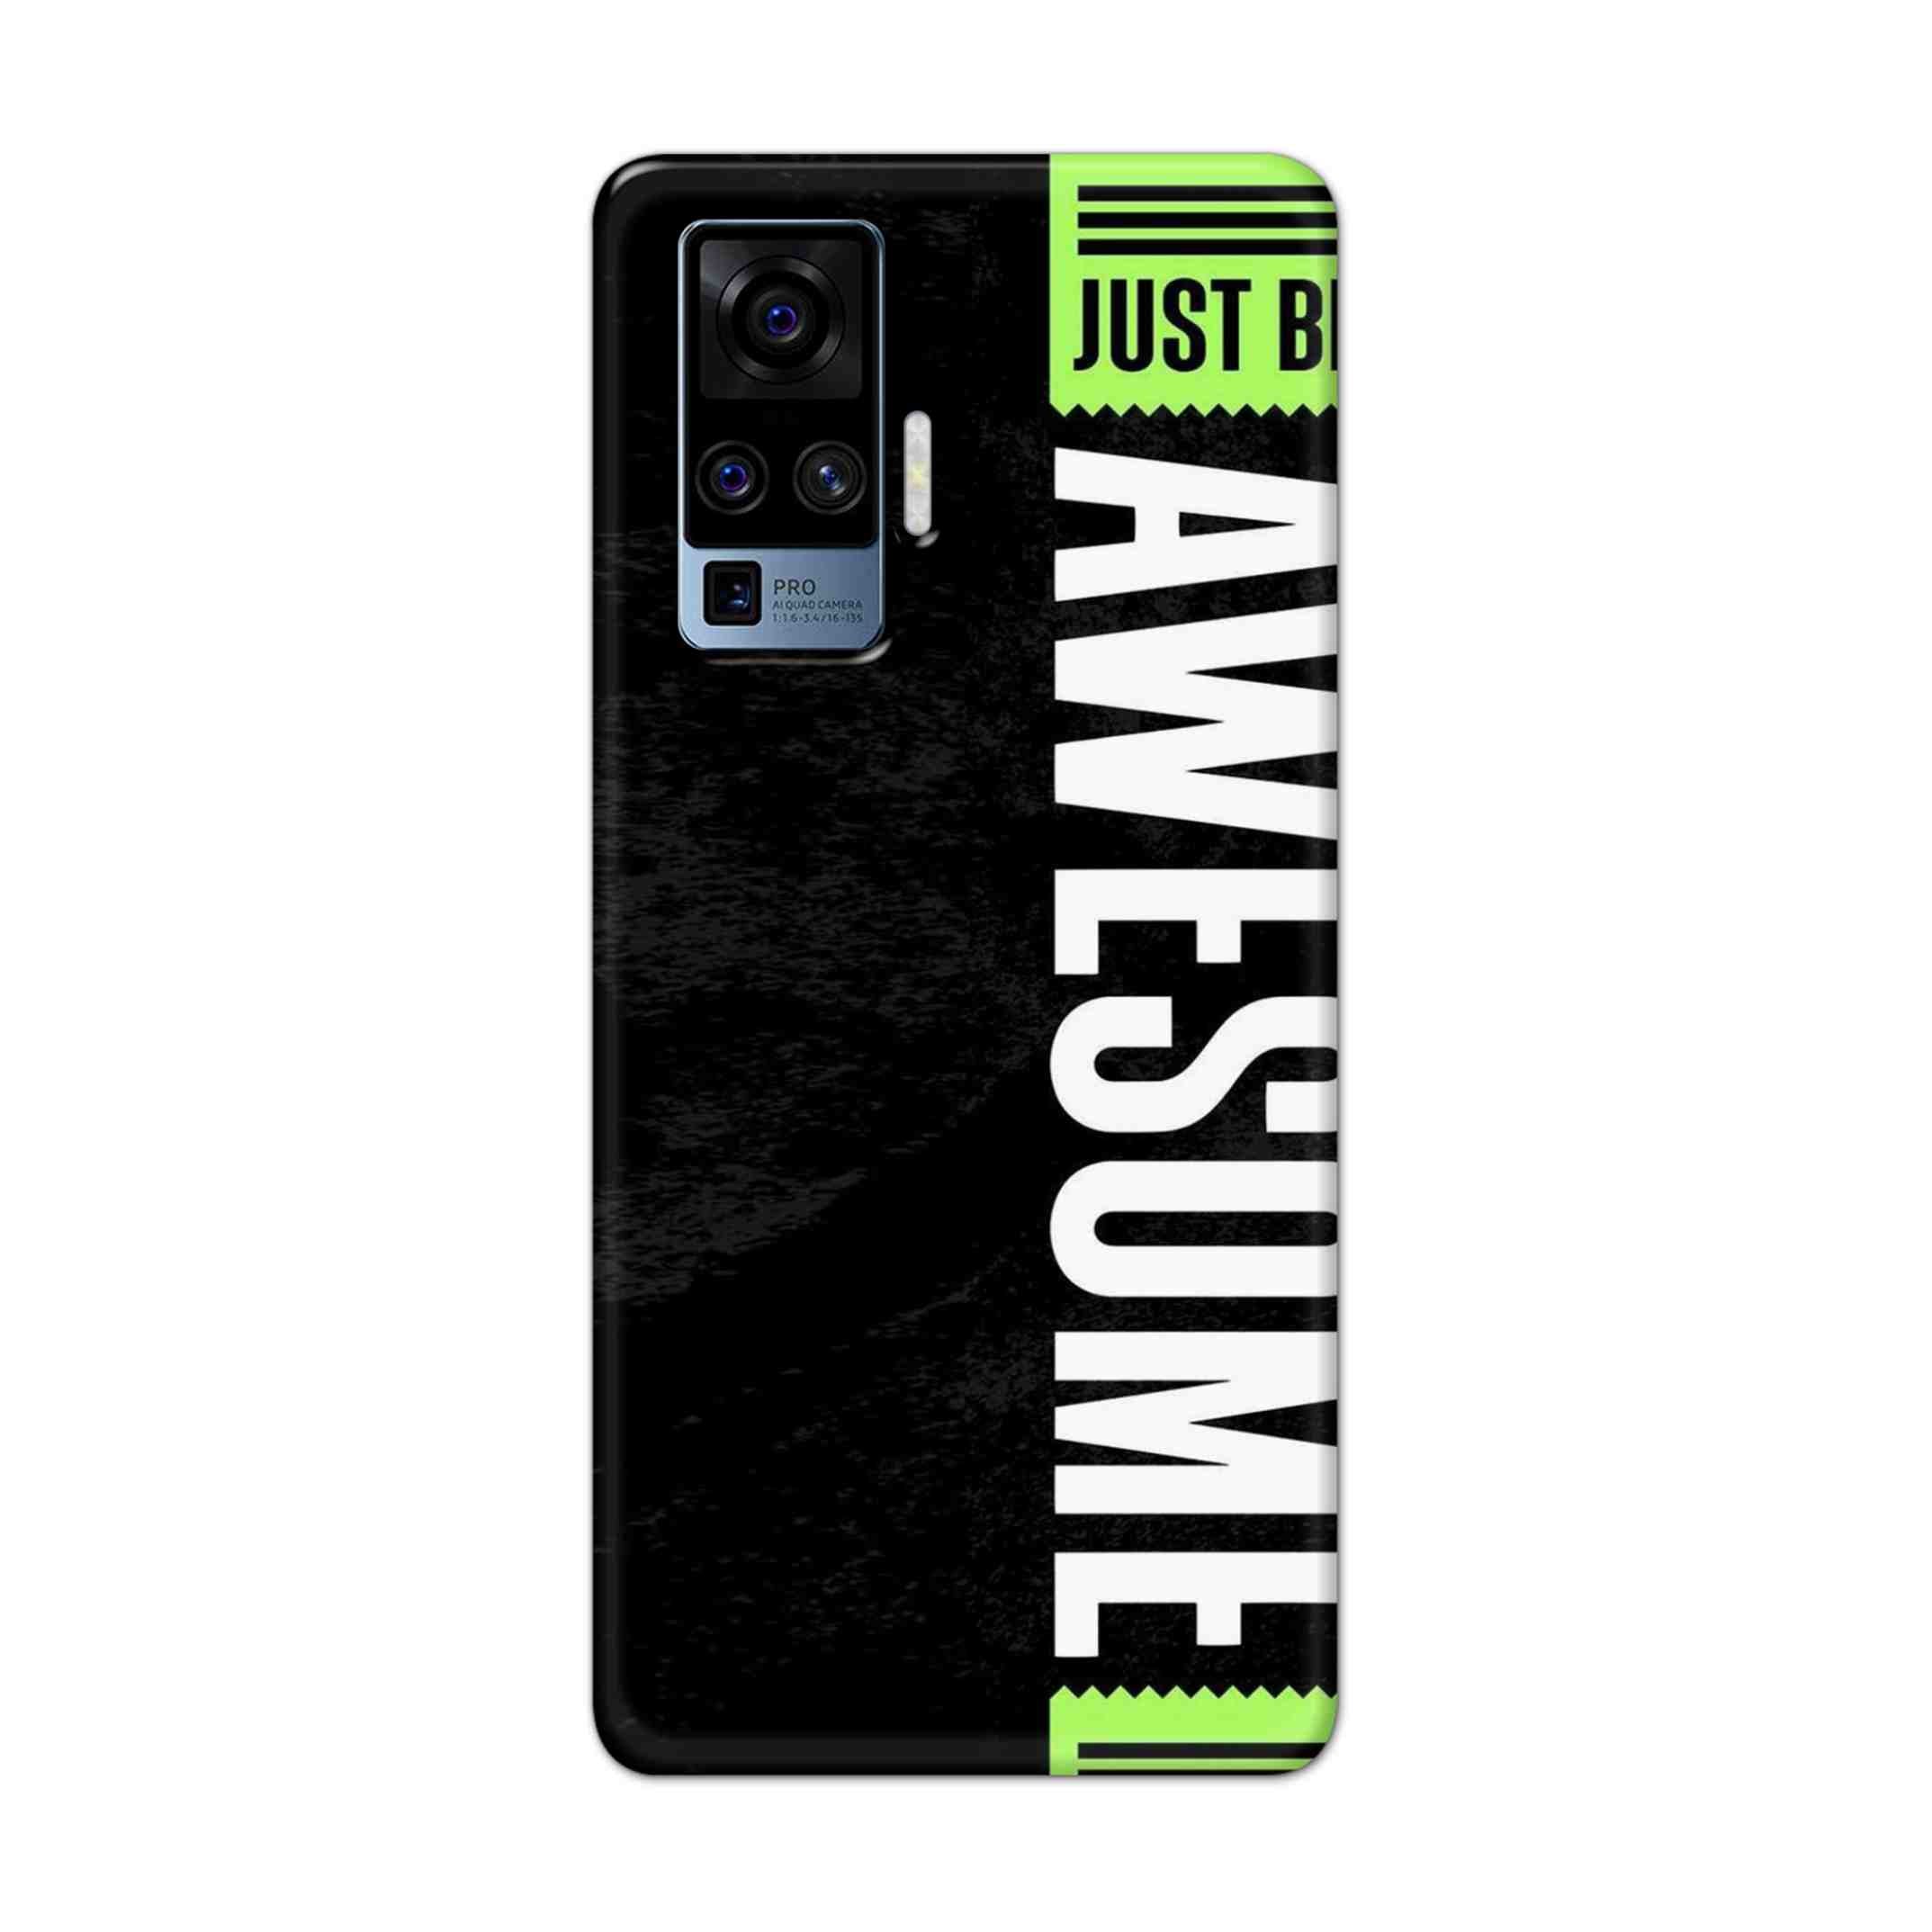 Buy Awesome Street Hard Back Mobile Phone Case/Cover For Vivo X50 Pro Online